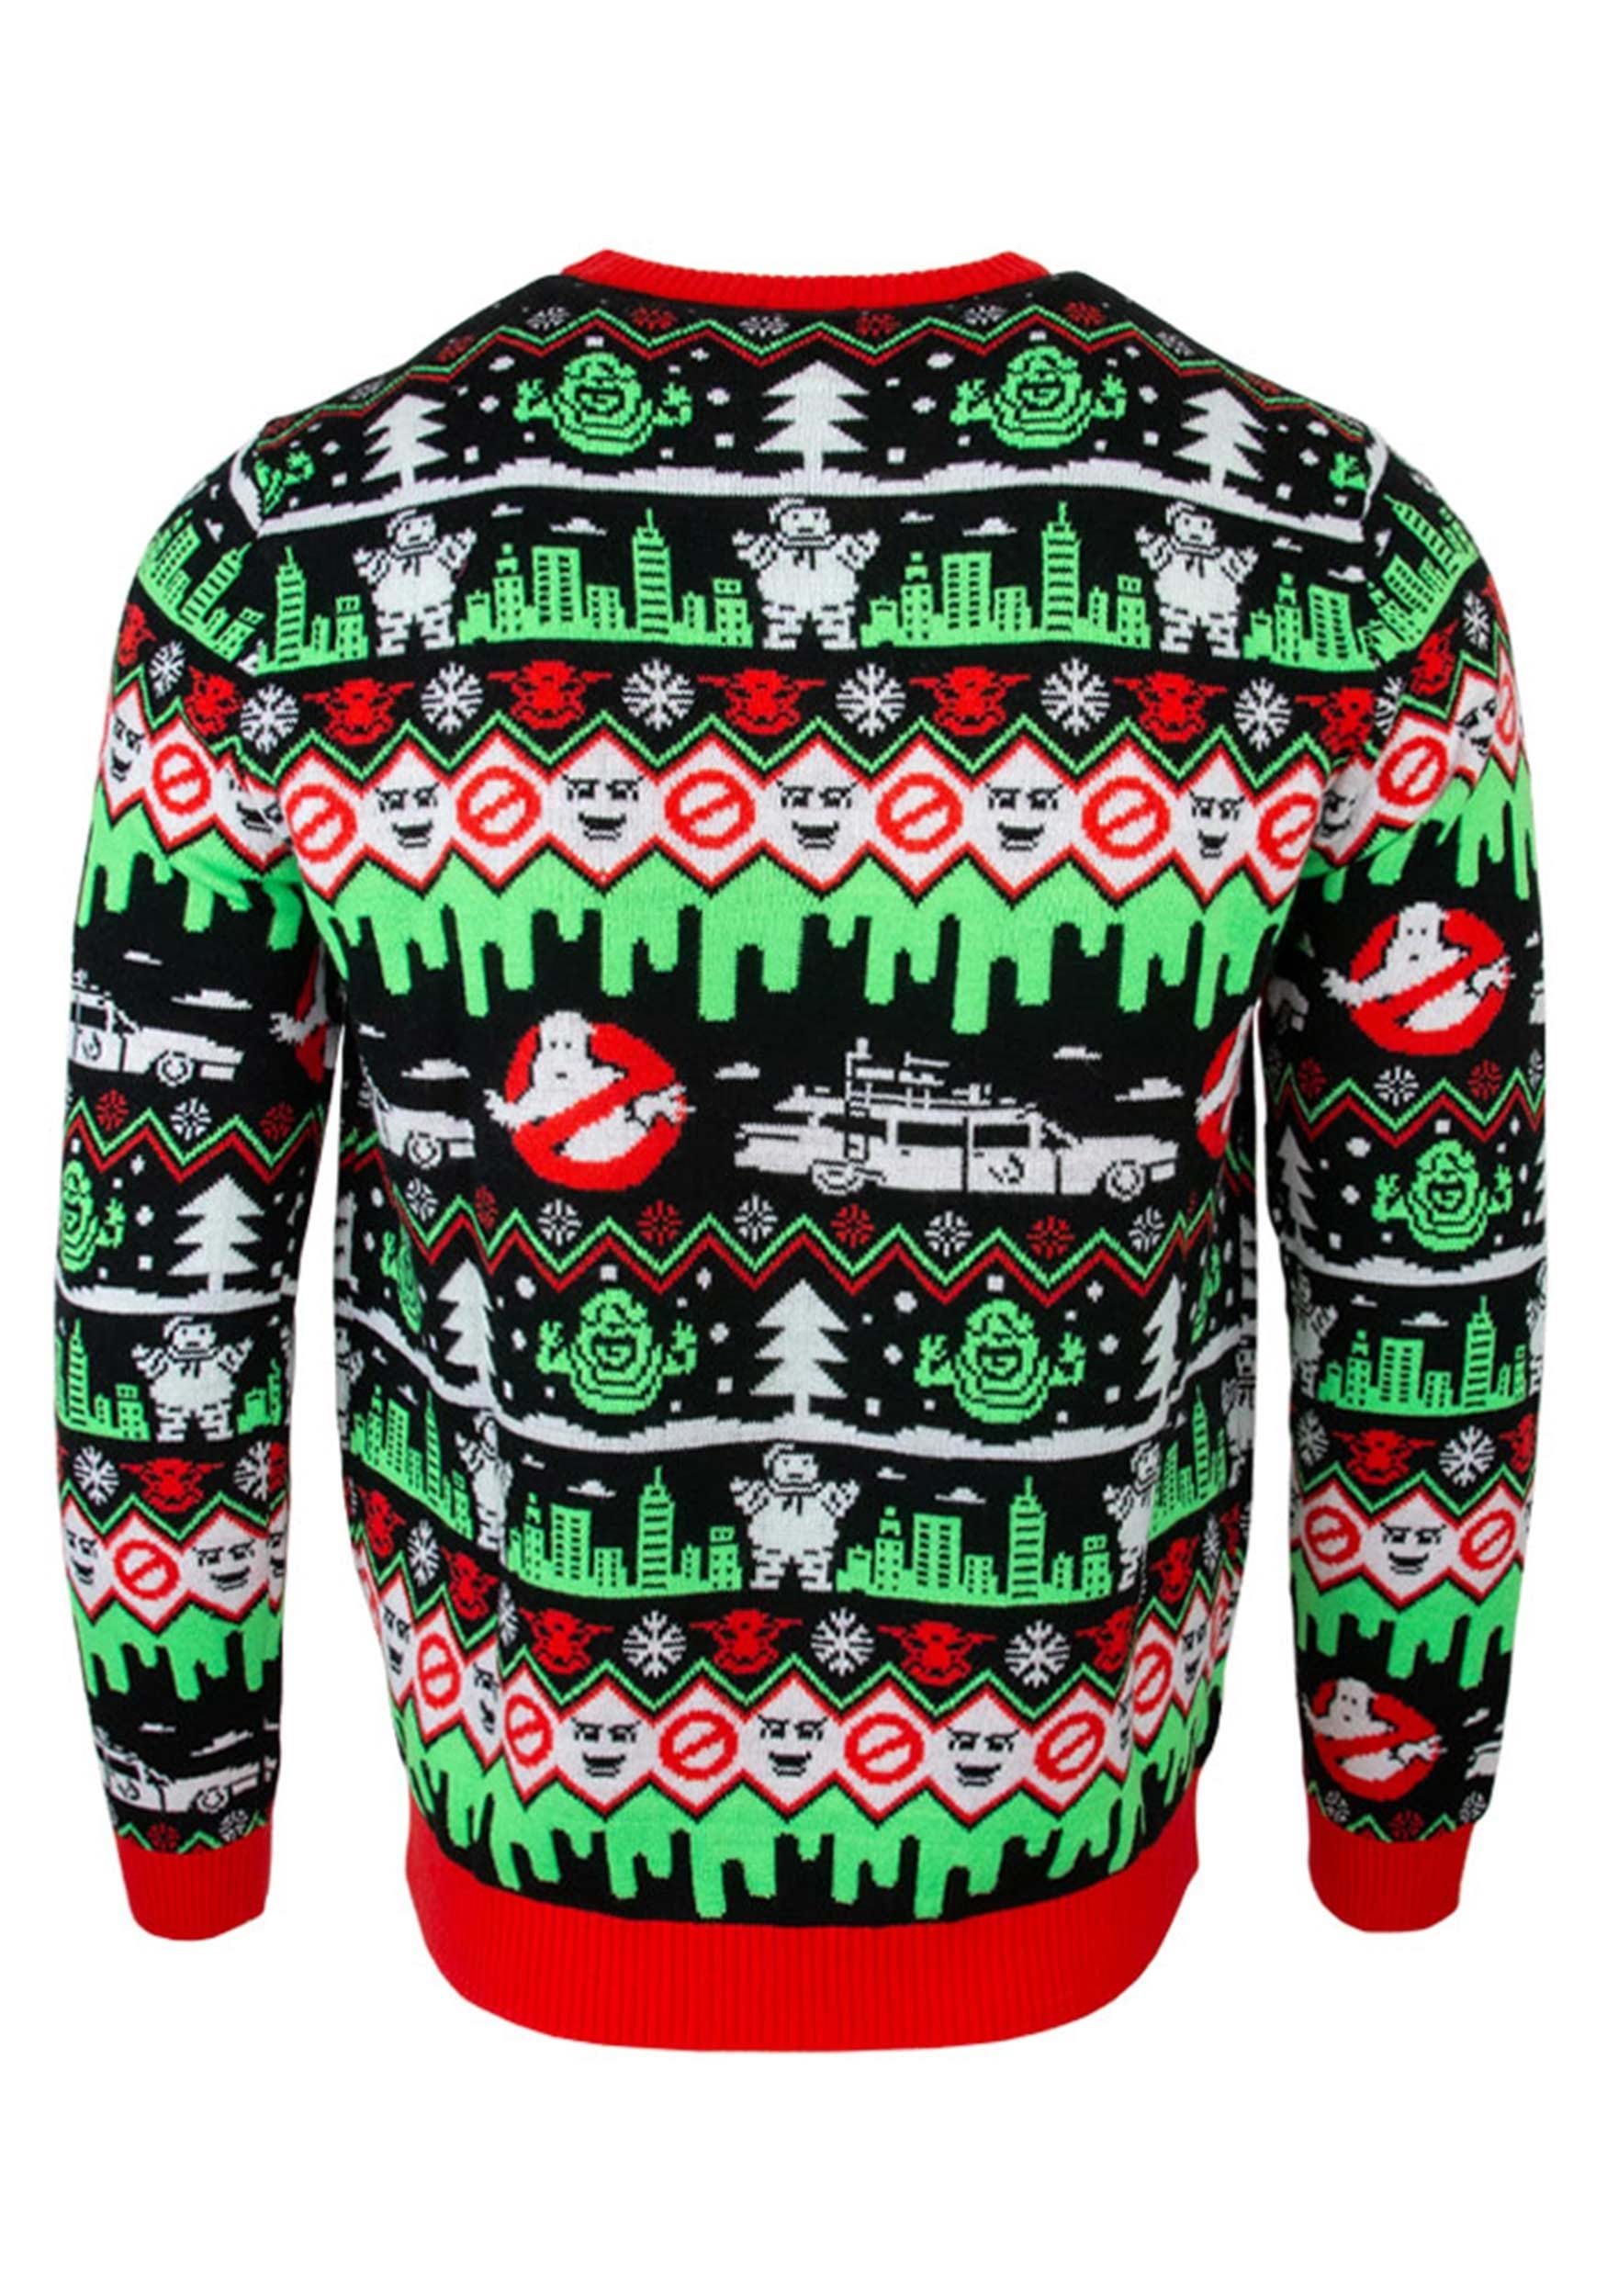 Ghostbusters Ugly Christmas Sweater For Adults